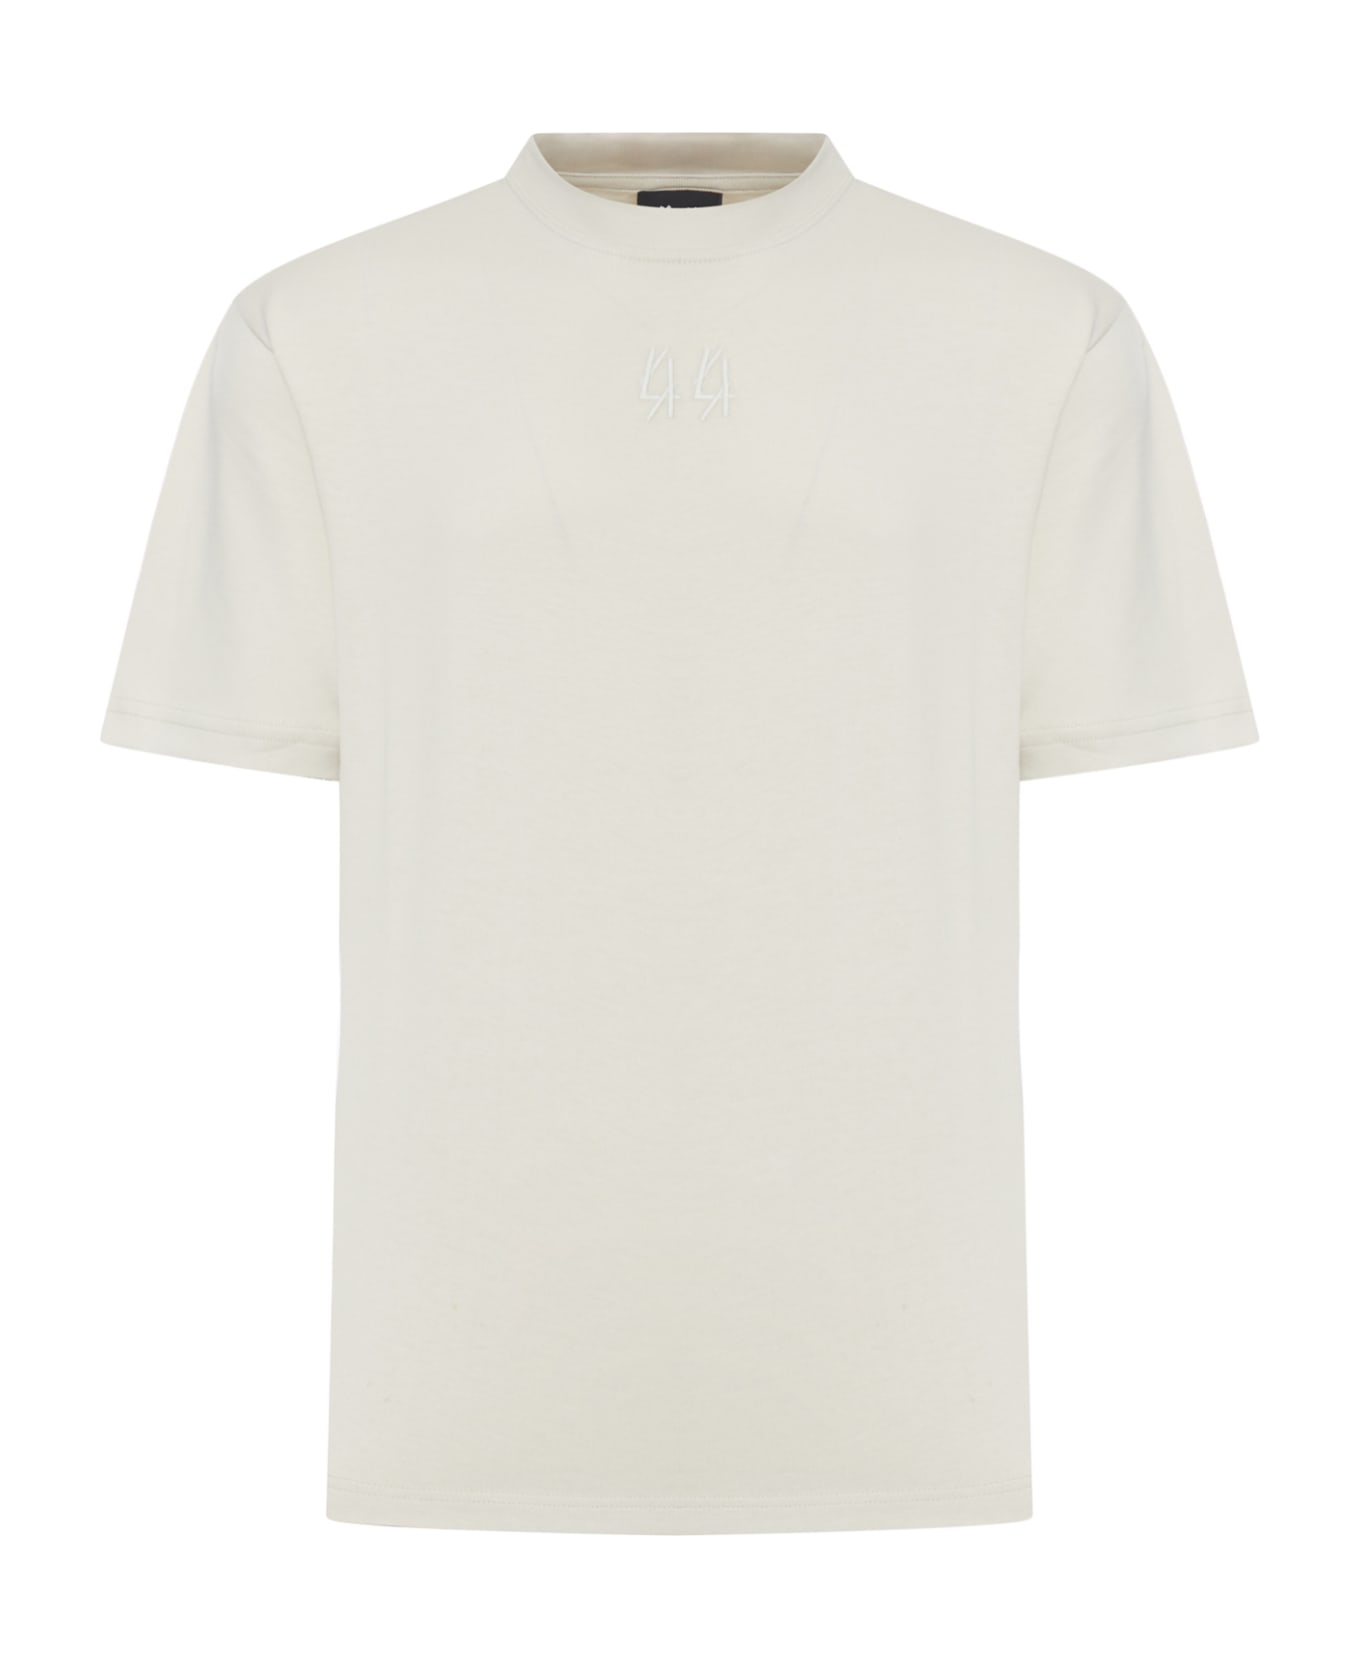 44 Label Group Classic Tee - Solid Black